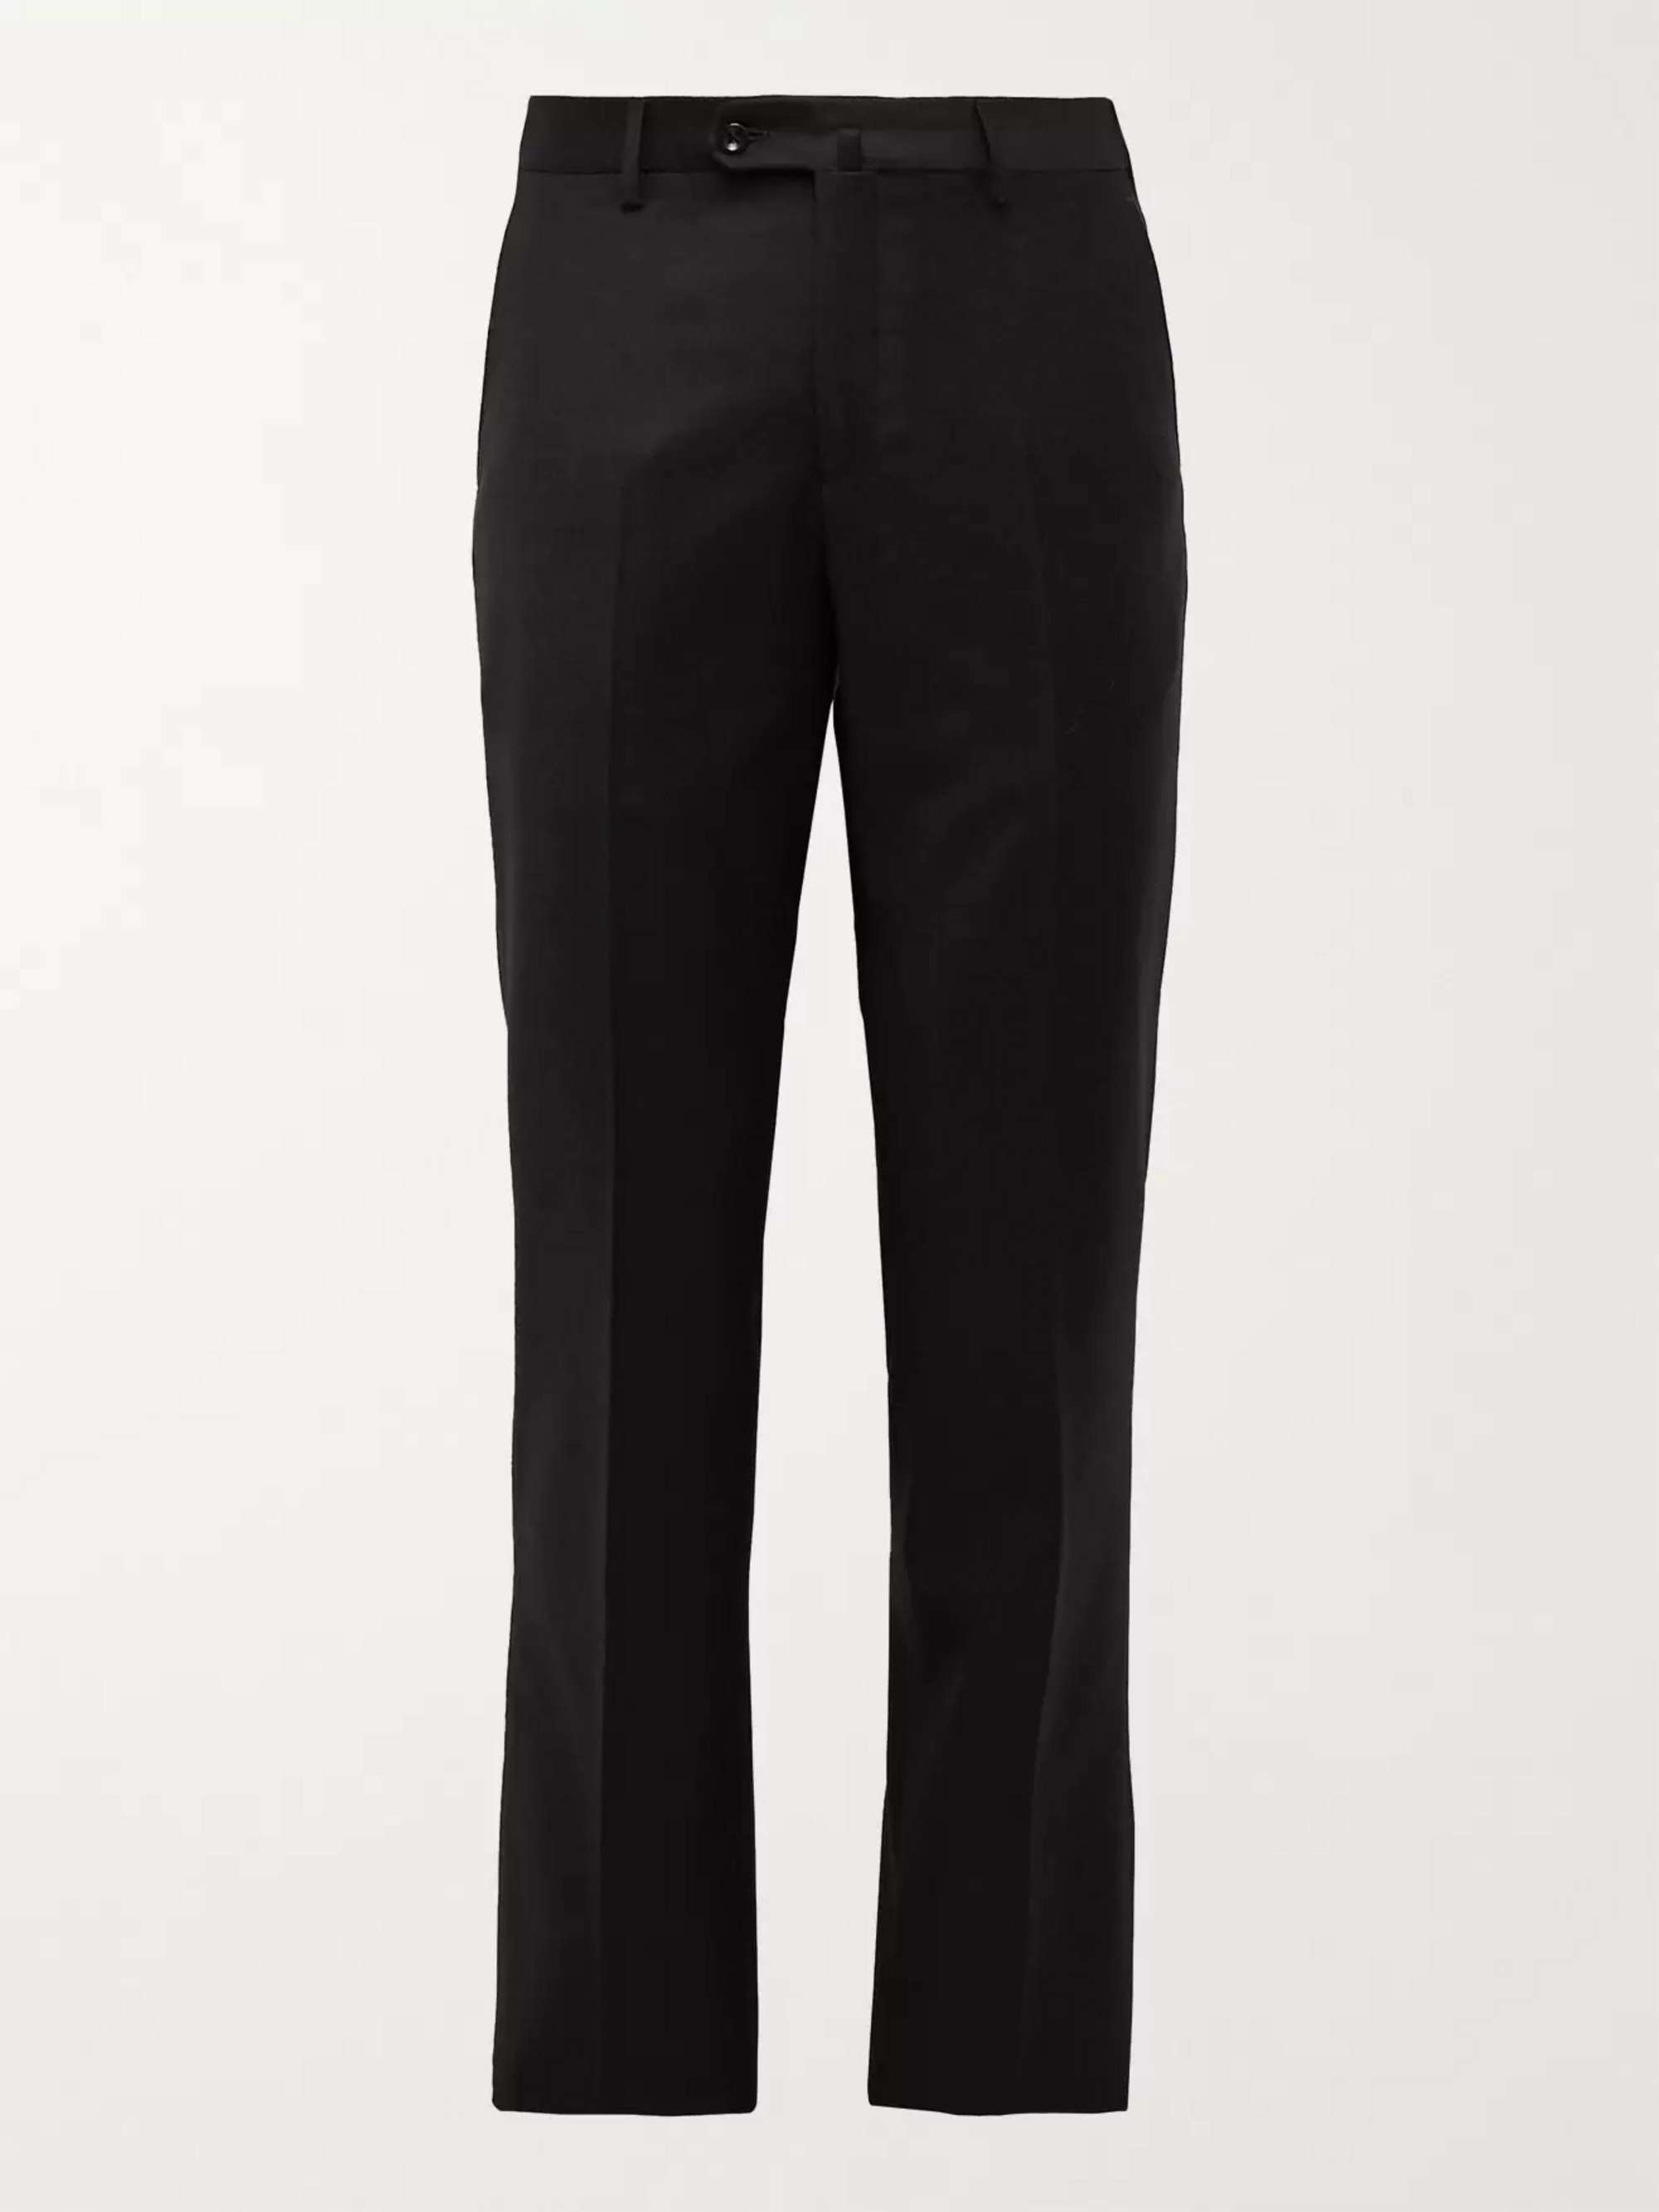 Black Slim-Fit Wool and Cashmere-Blend Flannel Trousers | LORO PIANA | MR  PORTER